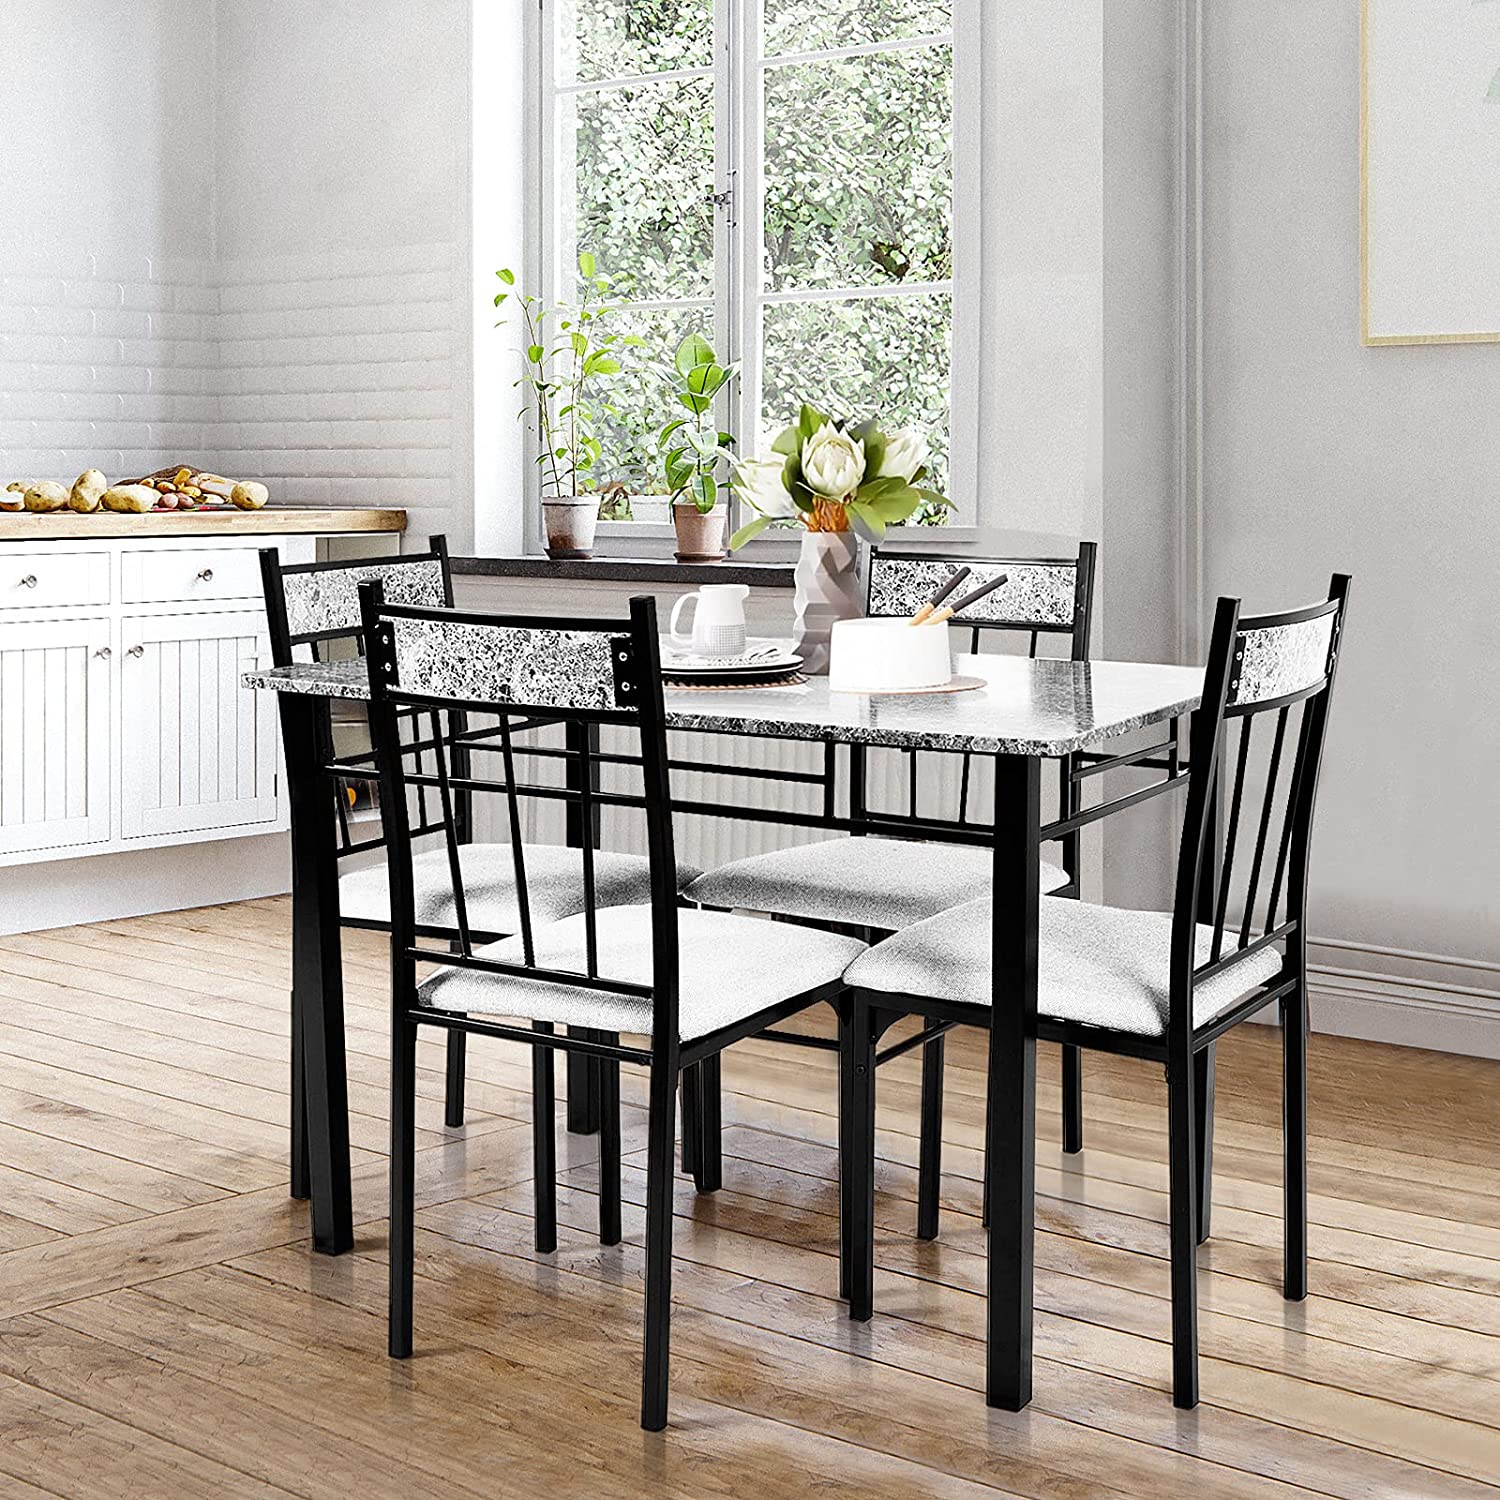 5 Piece Faux Marble Dining Table Set with Metal Frame and Padded Seat for 4 Persons